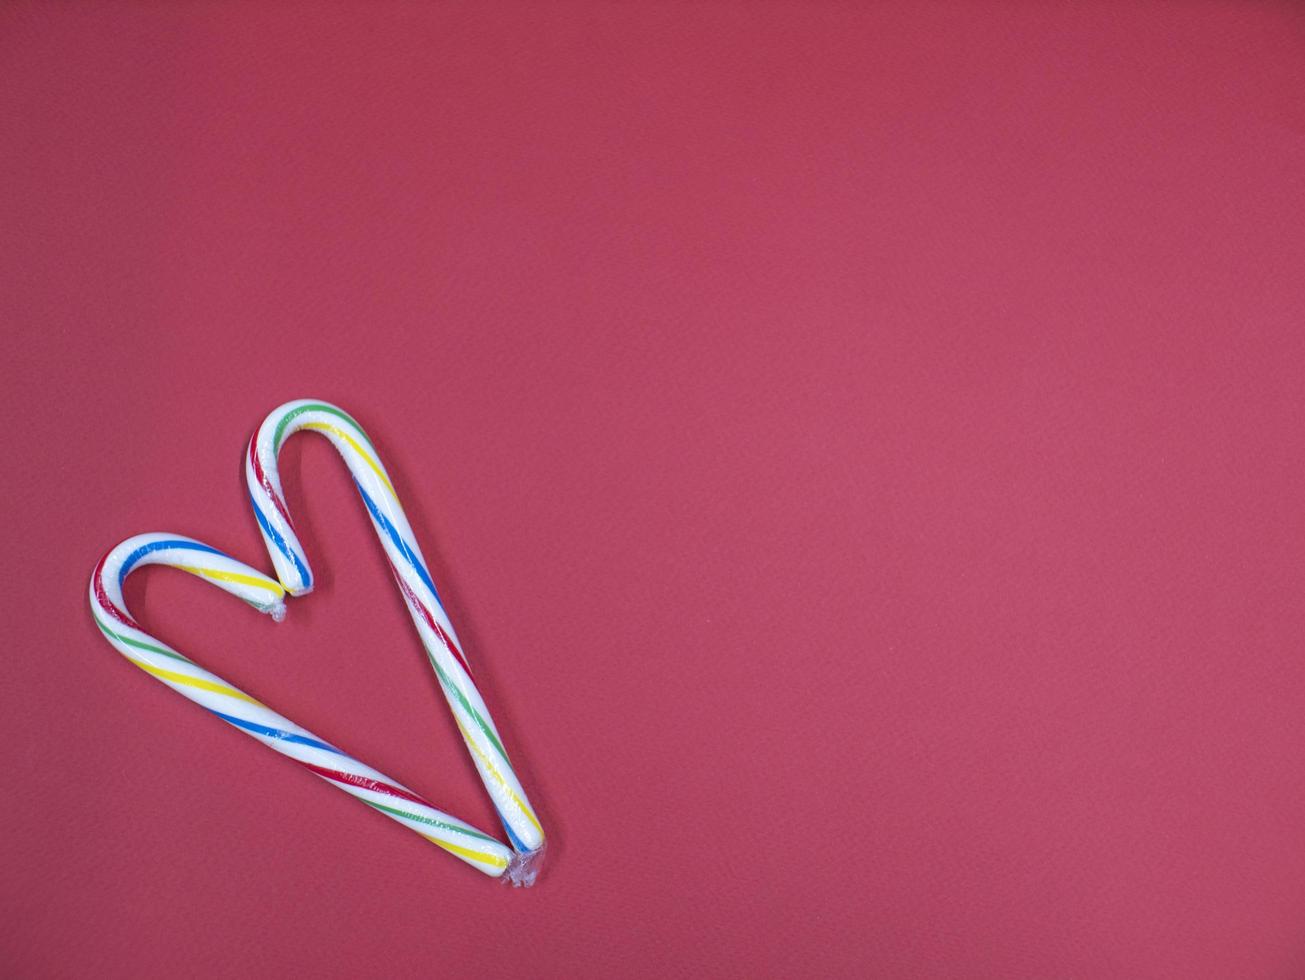 one caramel cane folded in the shape of a heart on a pink background photo